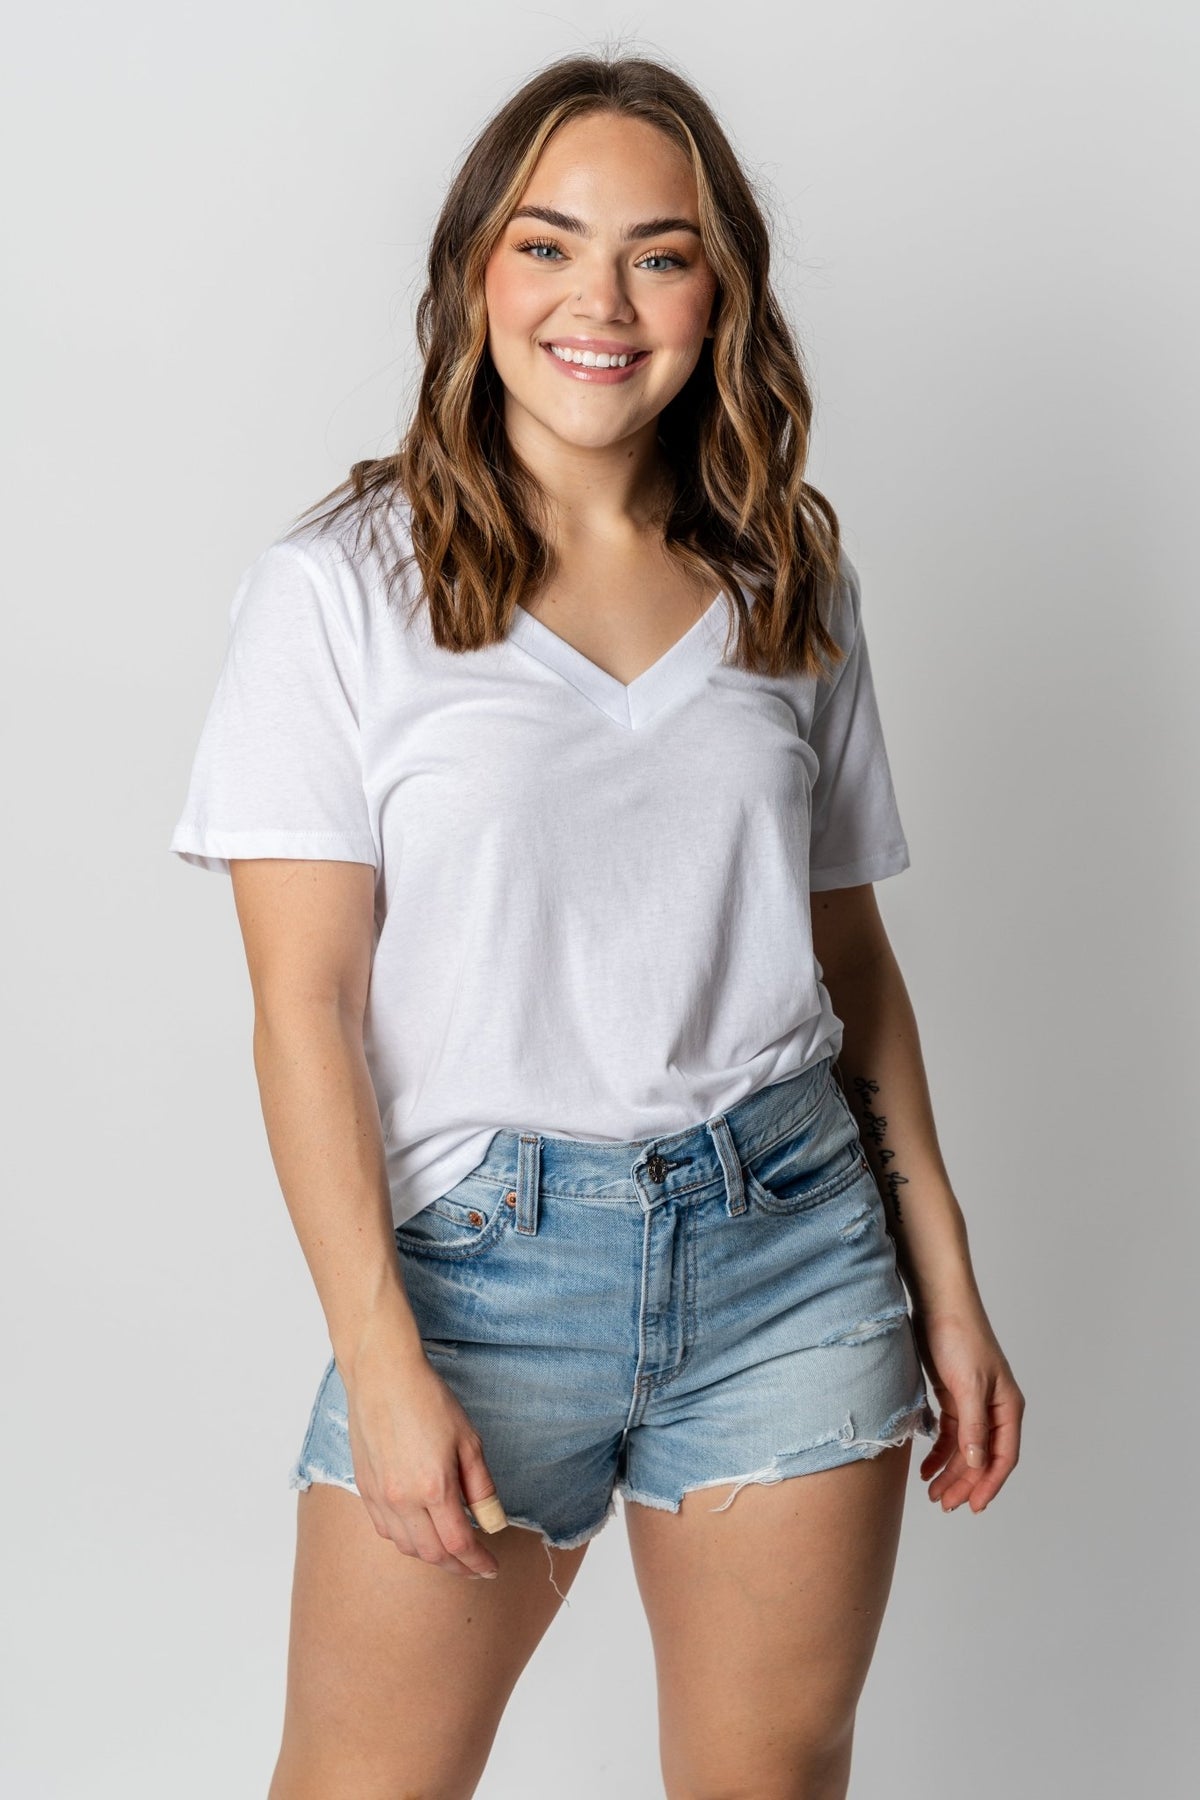 Z Supply girlfriend v-neck tee white - Z Supply T-shirts - Z Supply Tops, Dresses, Tanks, Tees, Cardigans, Joggers and Loungewear at Lush Fashion Lounge